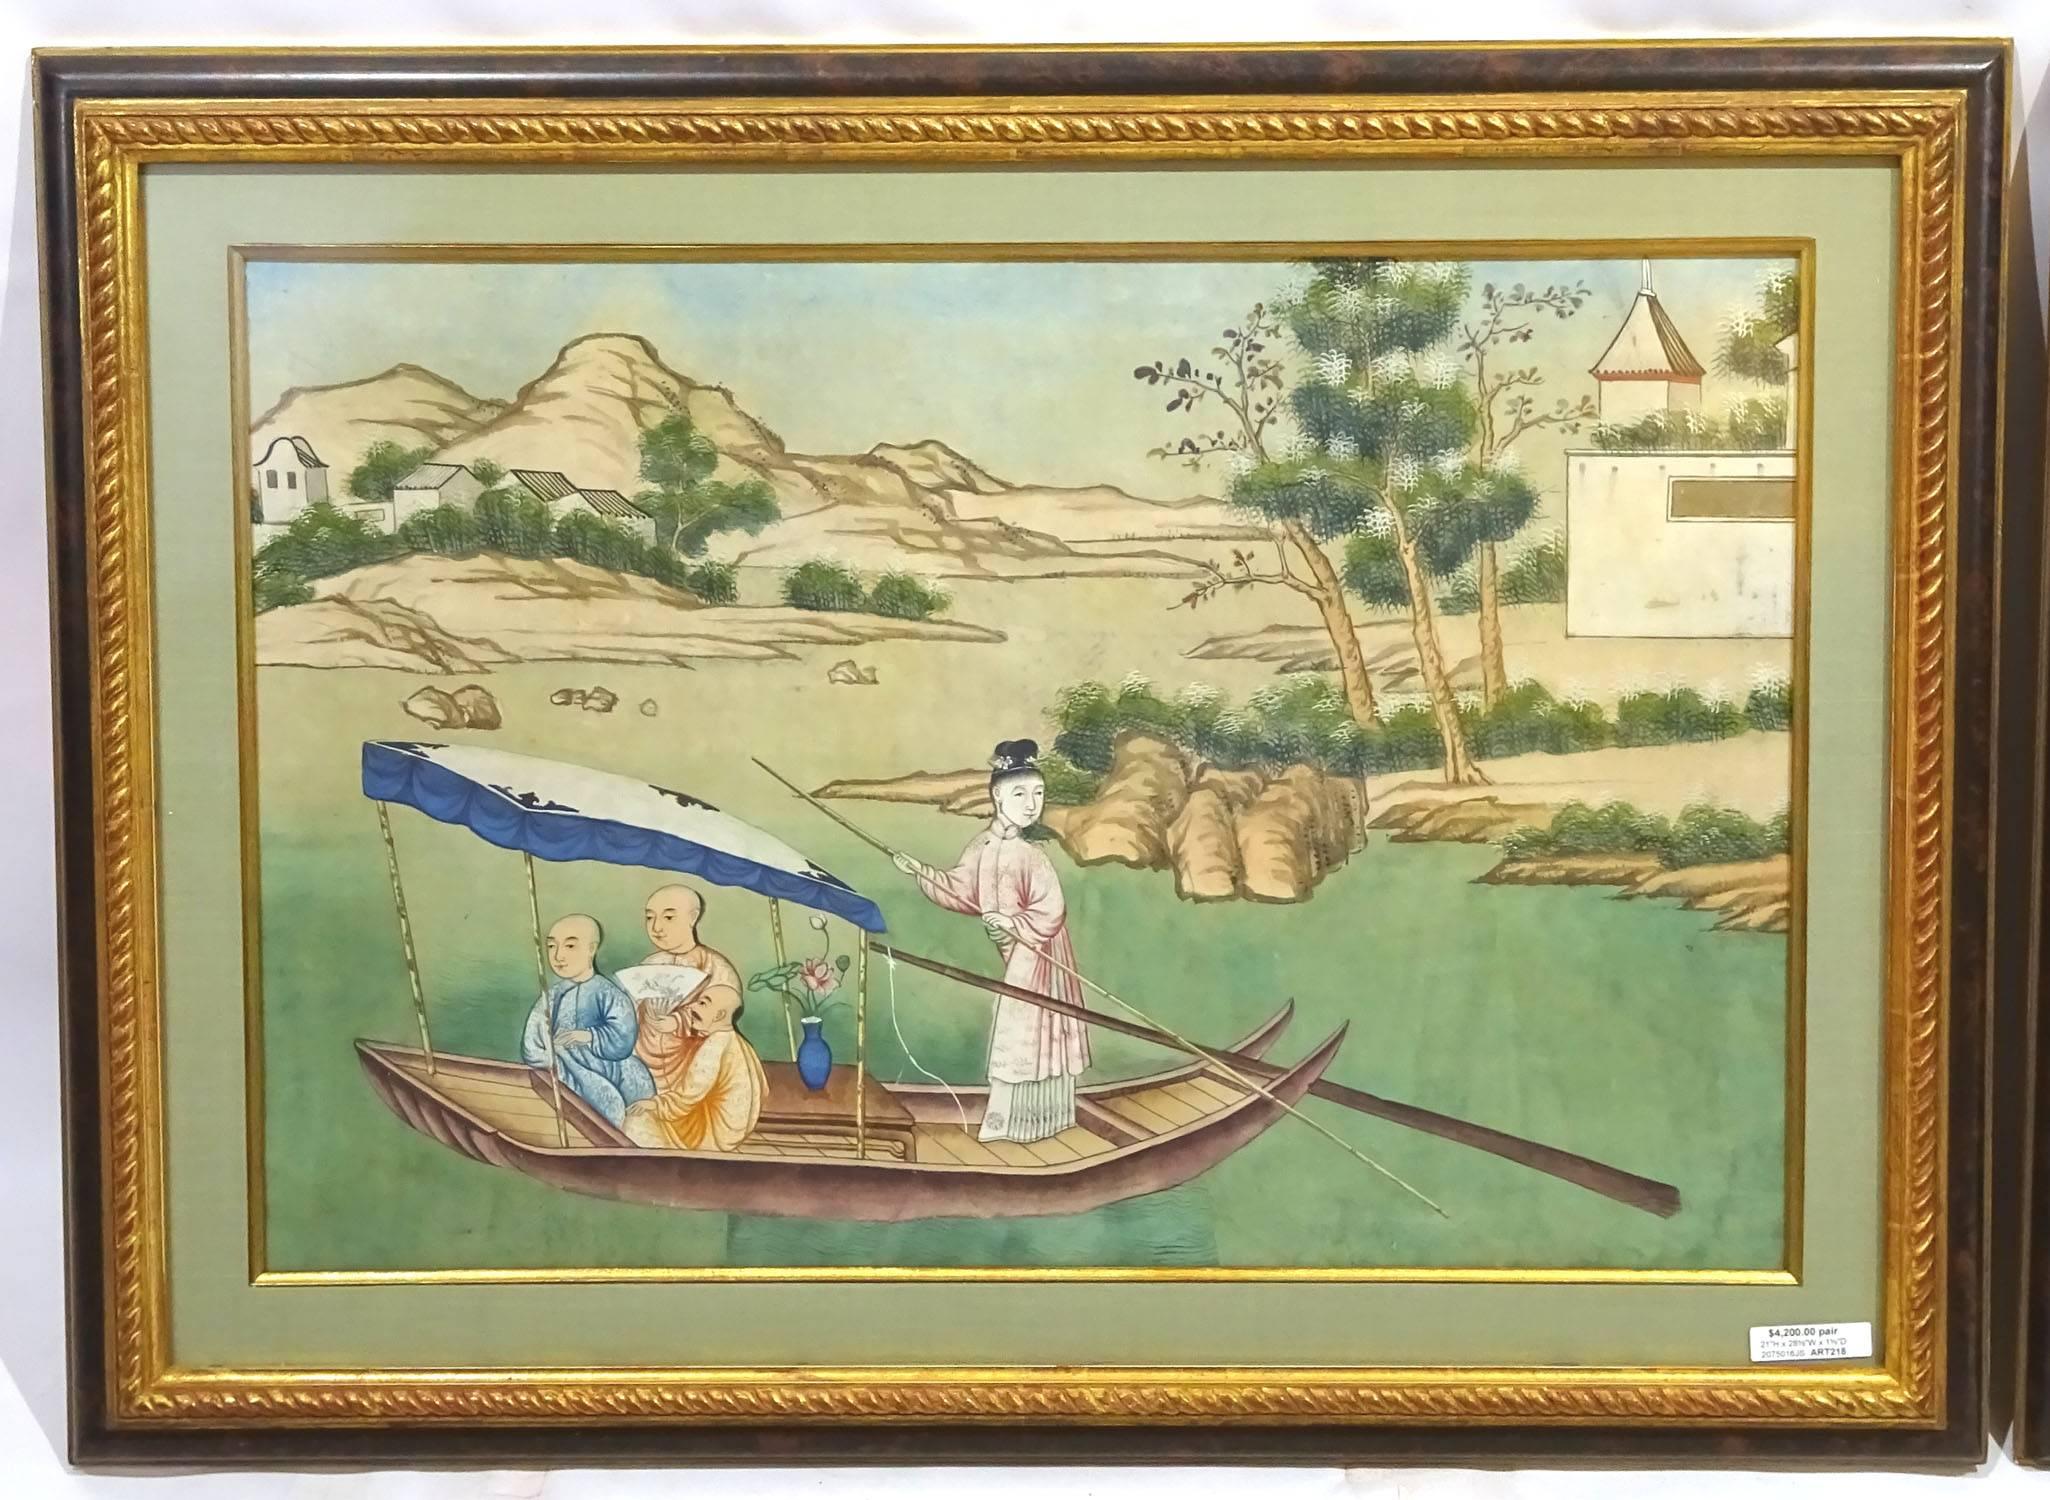 Pair of 19th Century Chinese drawings, one of a river scene with figures on a boat, the other of a landscape with figures working, mounted in wooden frames with pale green mats.